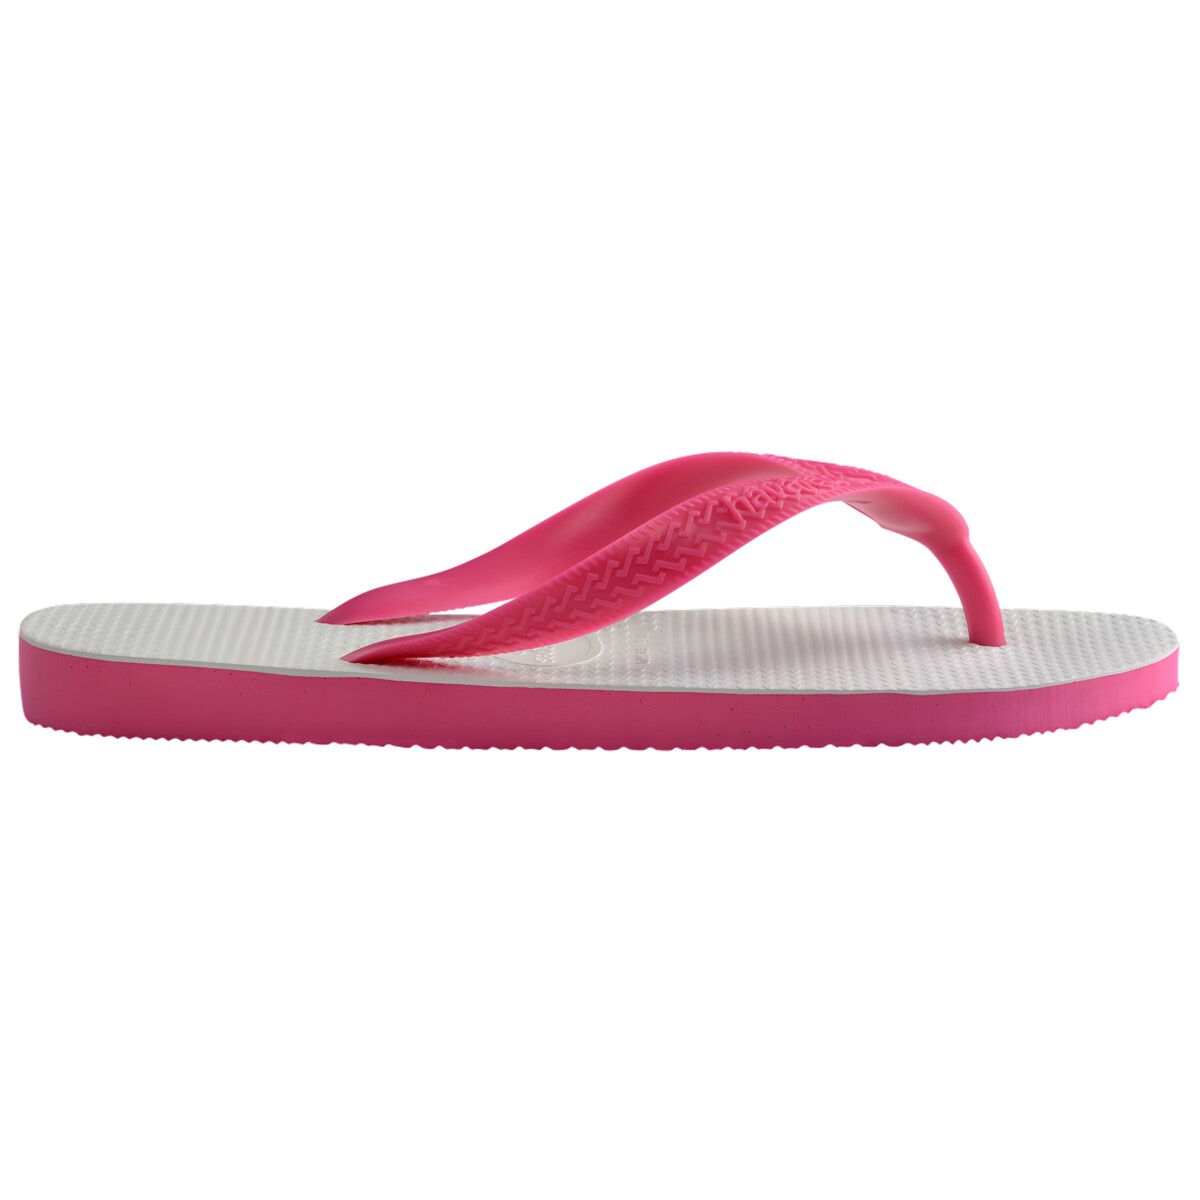 Chinelo Rosa Flux Tradicional Havaianas  n° 41/42 image number 2